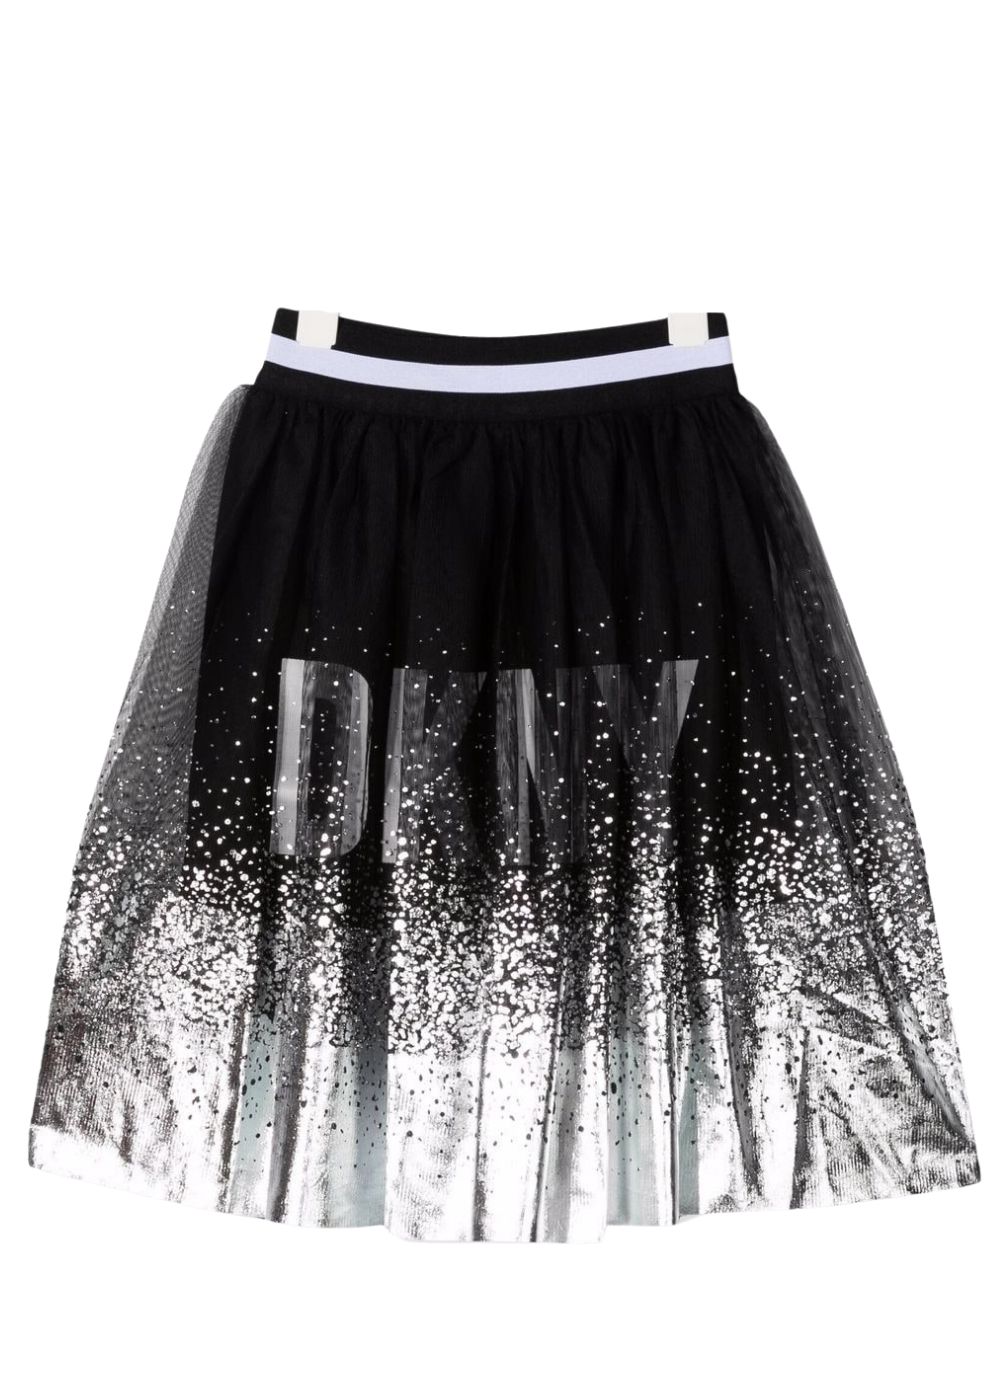 Featured image for “DKNY TUTU' METALLIZZATO”